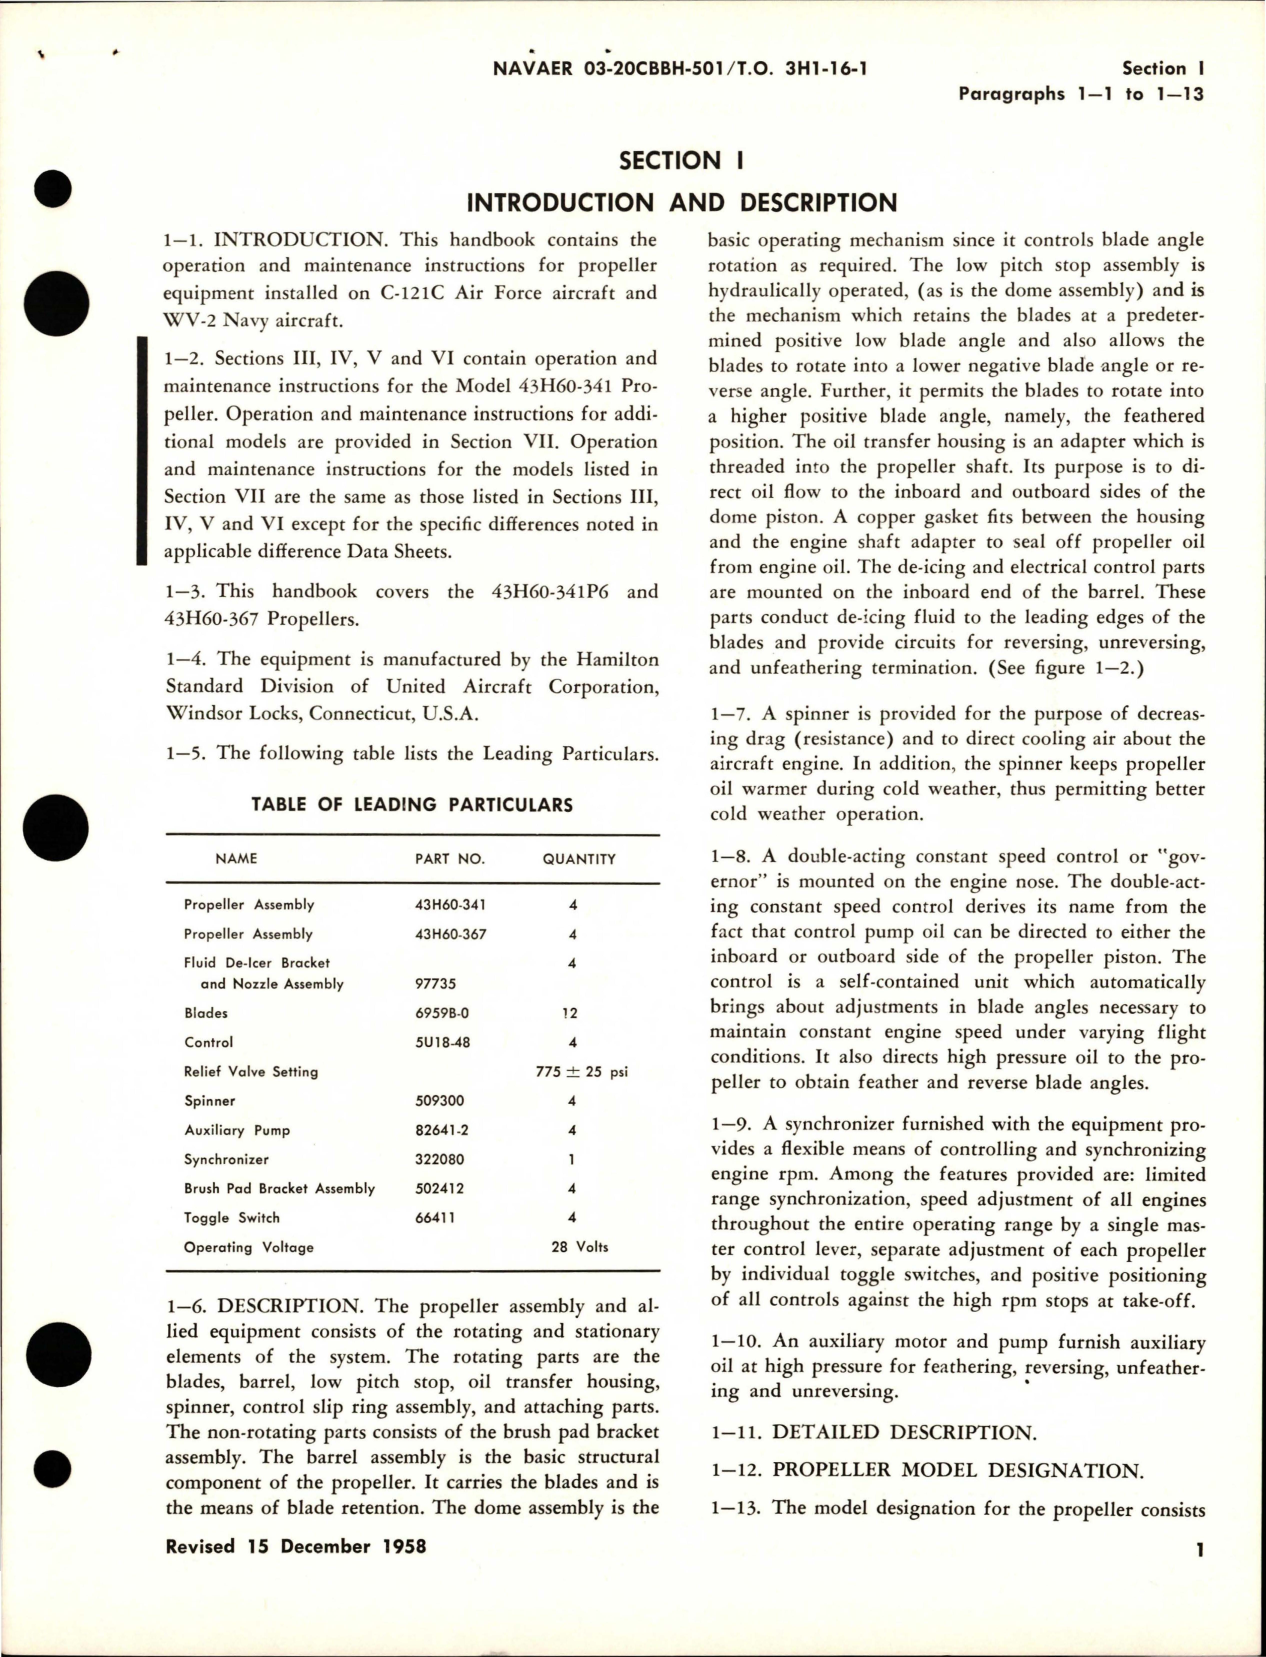 Sample page 5 from AirCorps Library document: Operation and Maintenance Instructions for Variable Pitch Propeller - Model 43H60-341 and 43H60-367